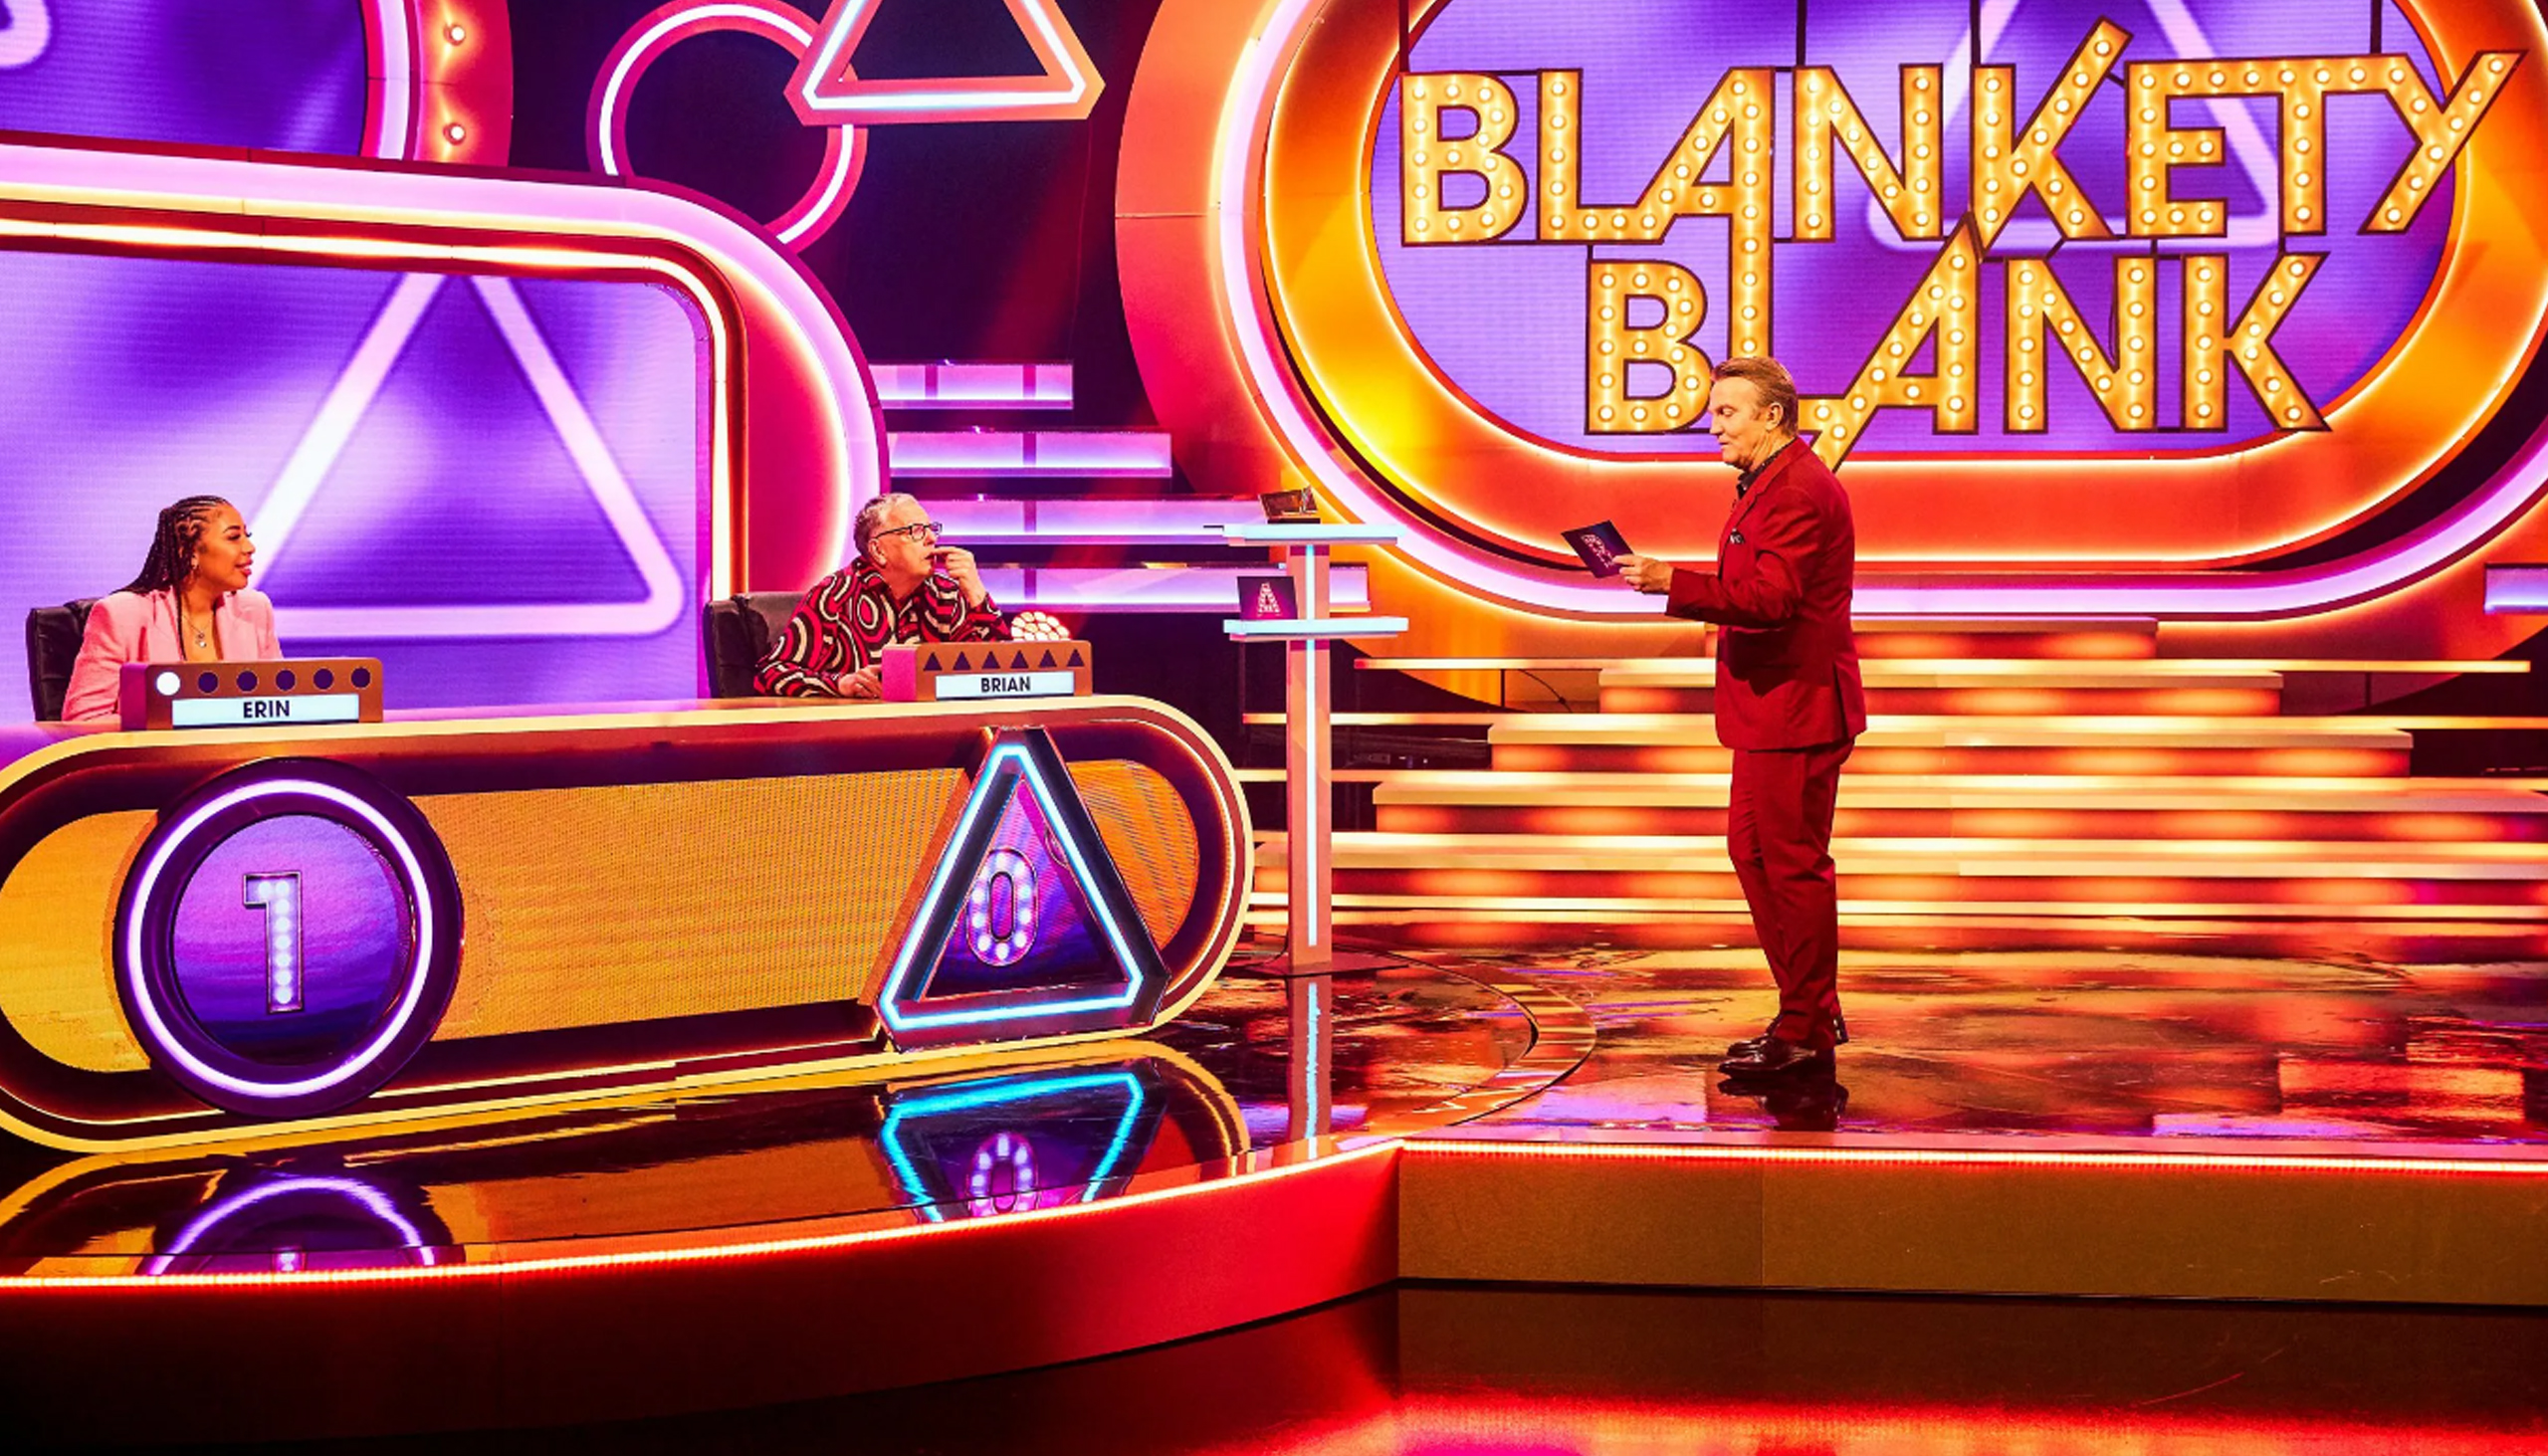 Movetech UK takes centre stage with Fremantle for the fourth consecutive series of popular TV gameshow – Blankety Blank